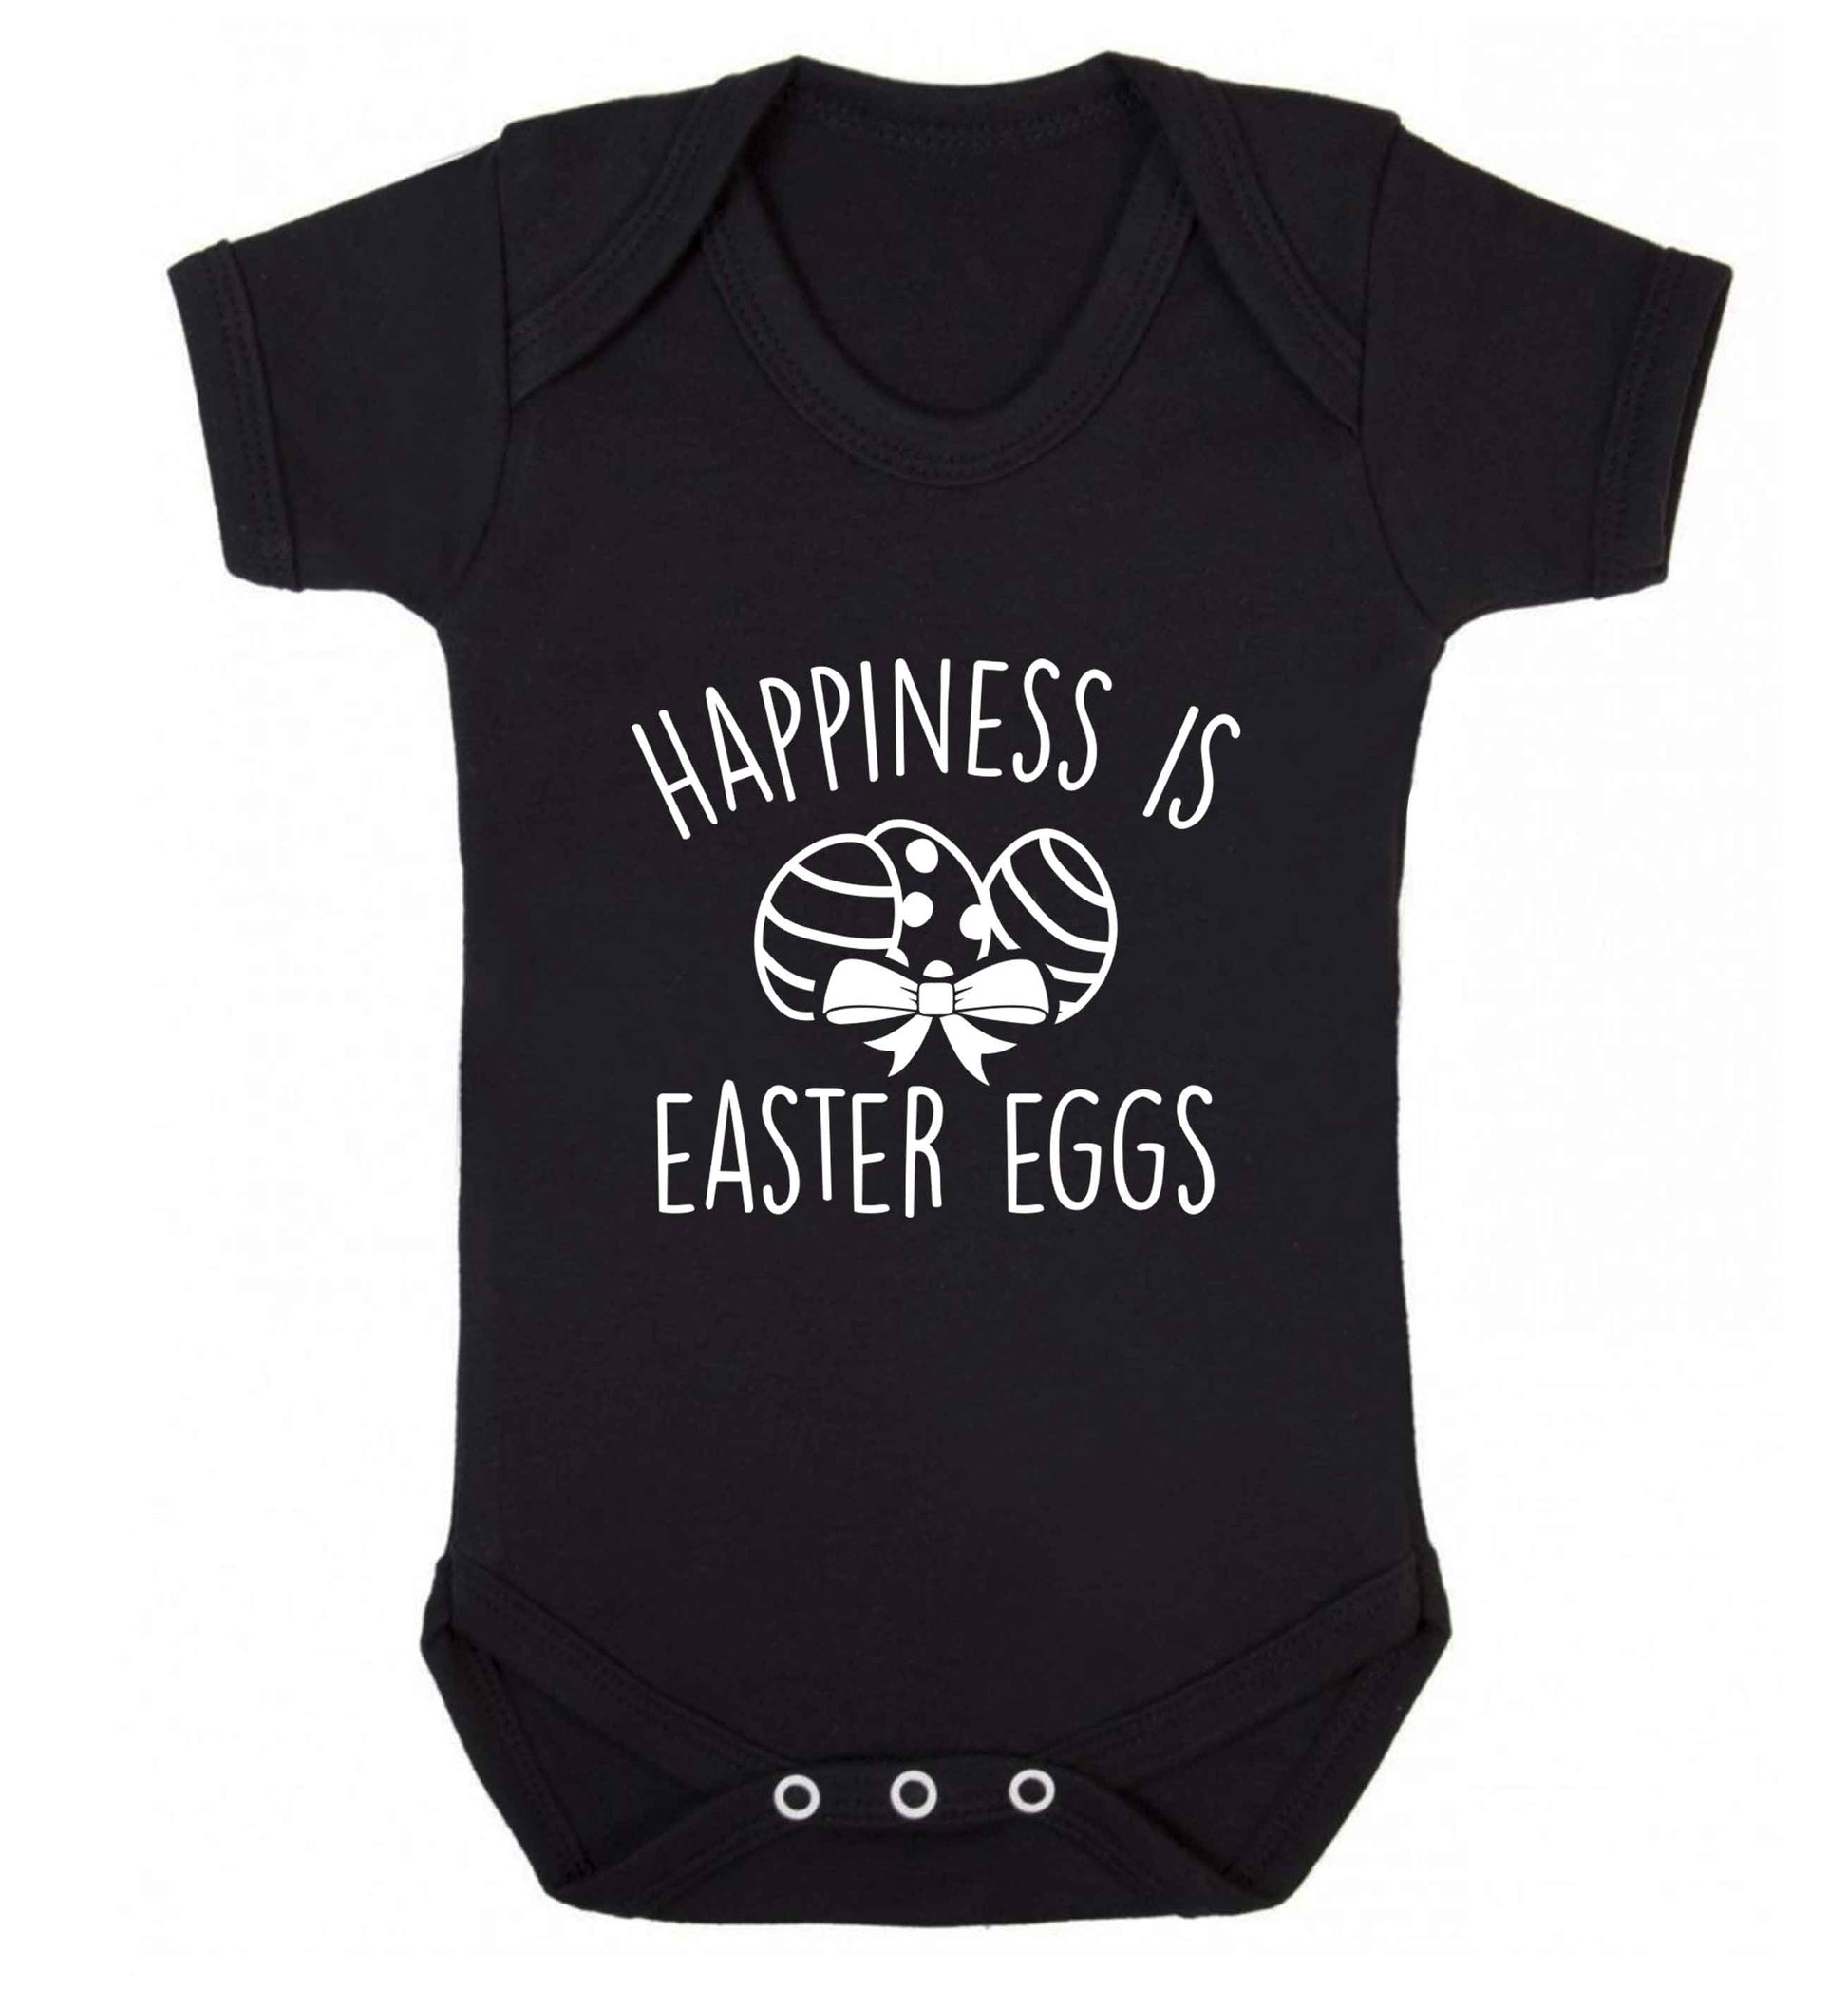 Happiness is Easter eggs baby vest black 18-24 months